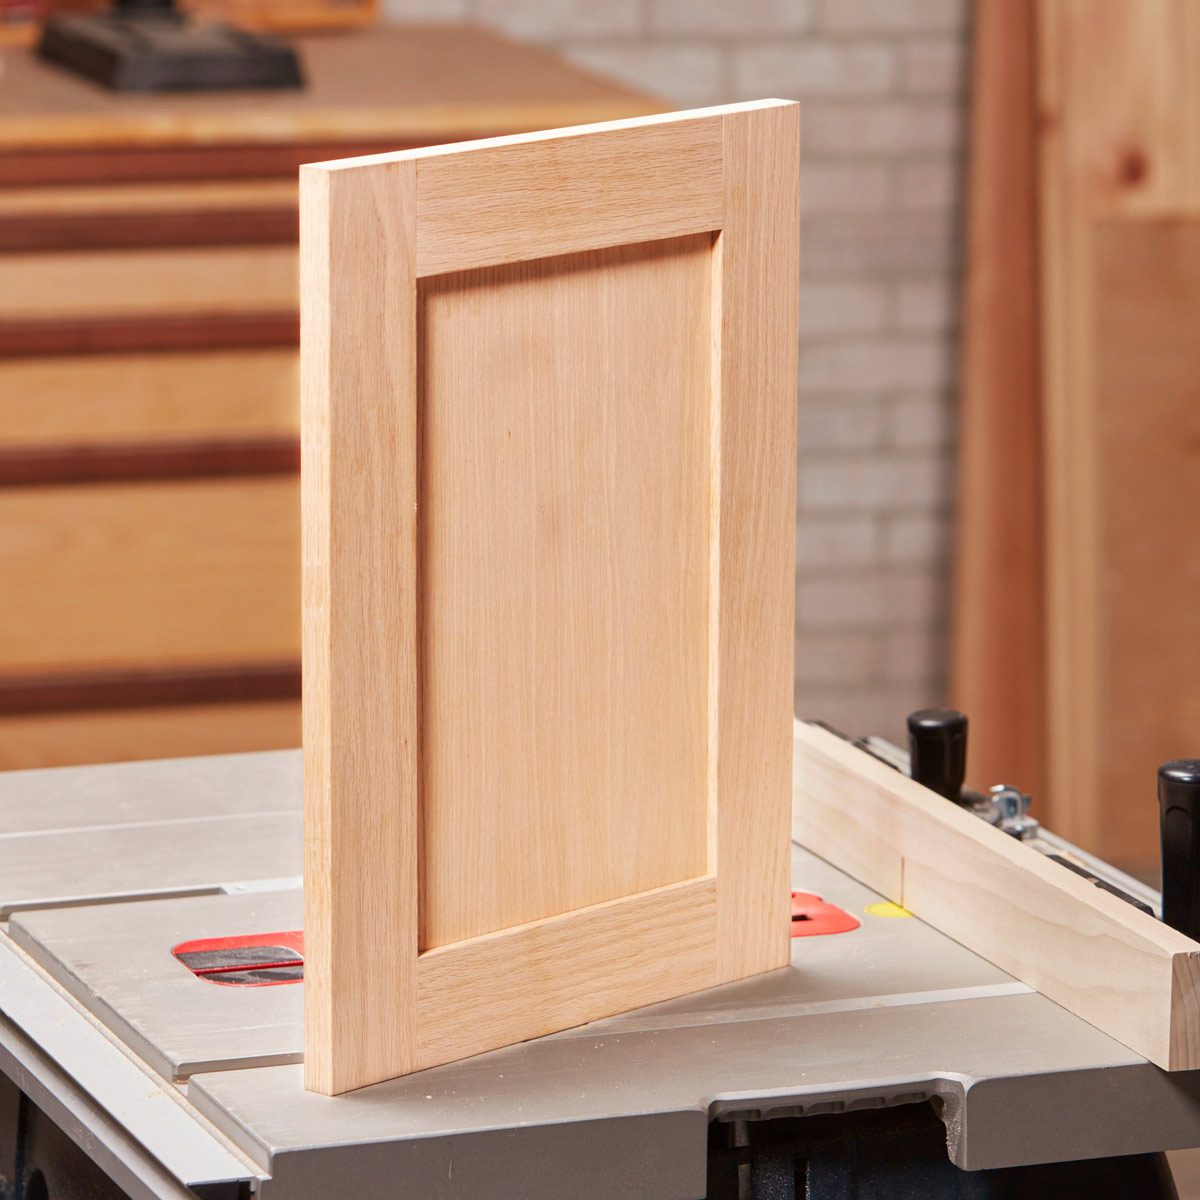 Diy Cabinet Doors How To Build And Install